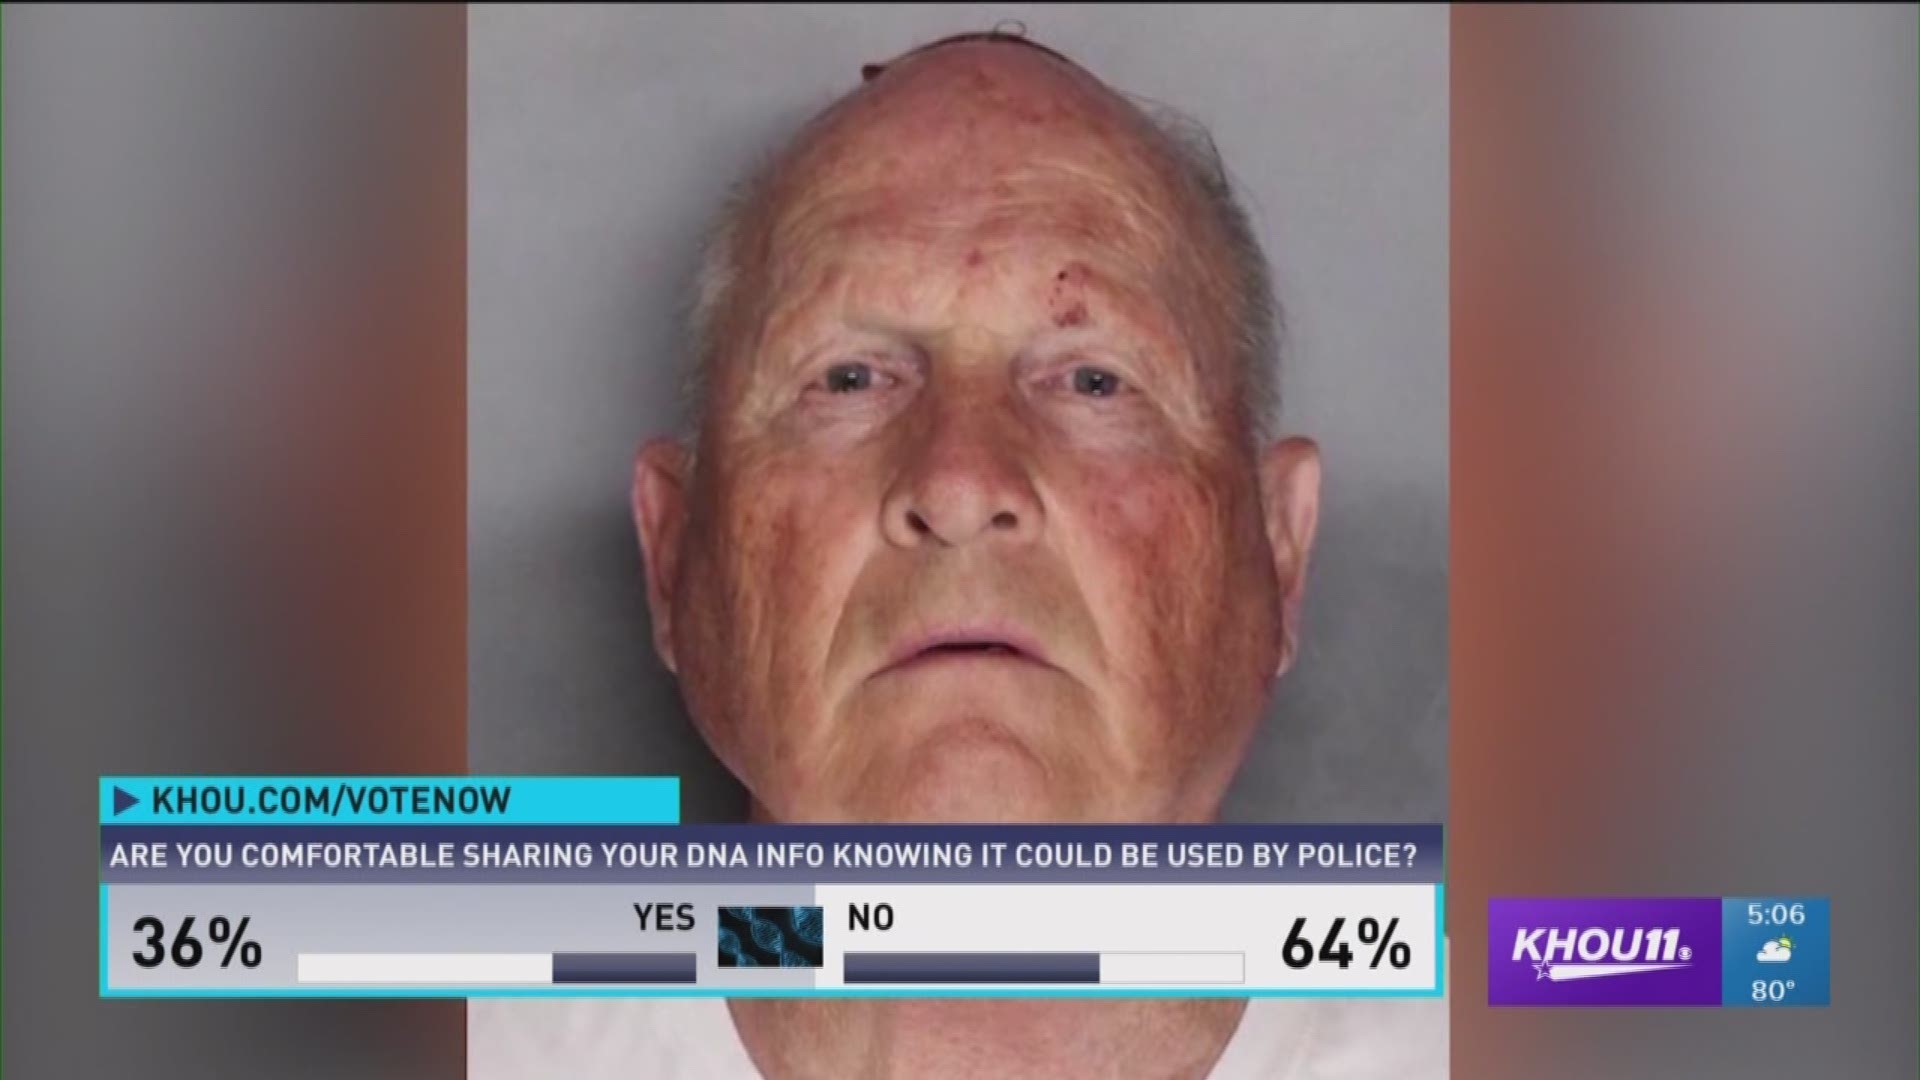 Investigators say they arrested the "Golden State Killer" this week after DNA at old crimes scenes was matched with samples from ancestry websites. That's raised privacy concerns for many.